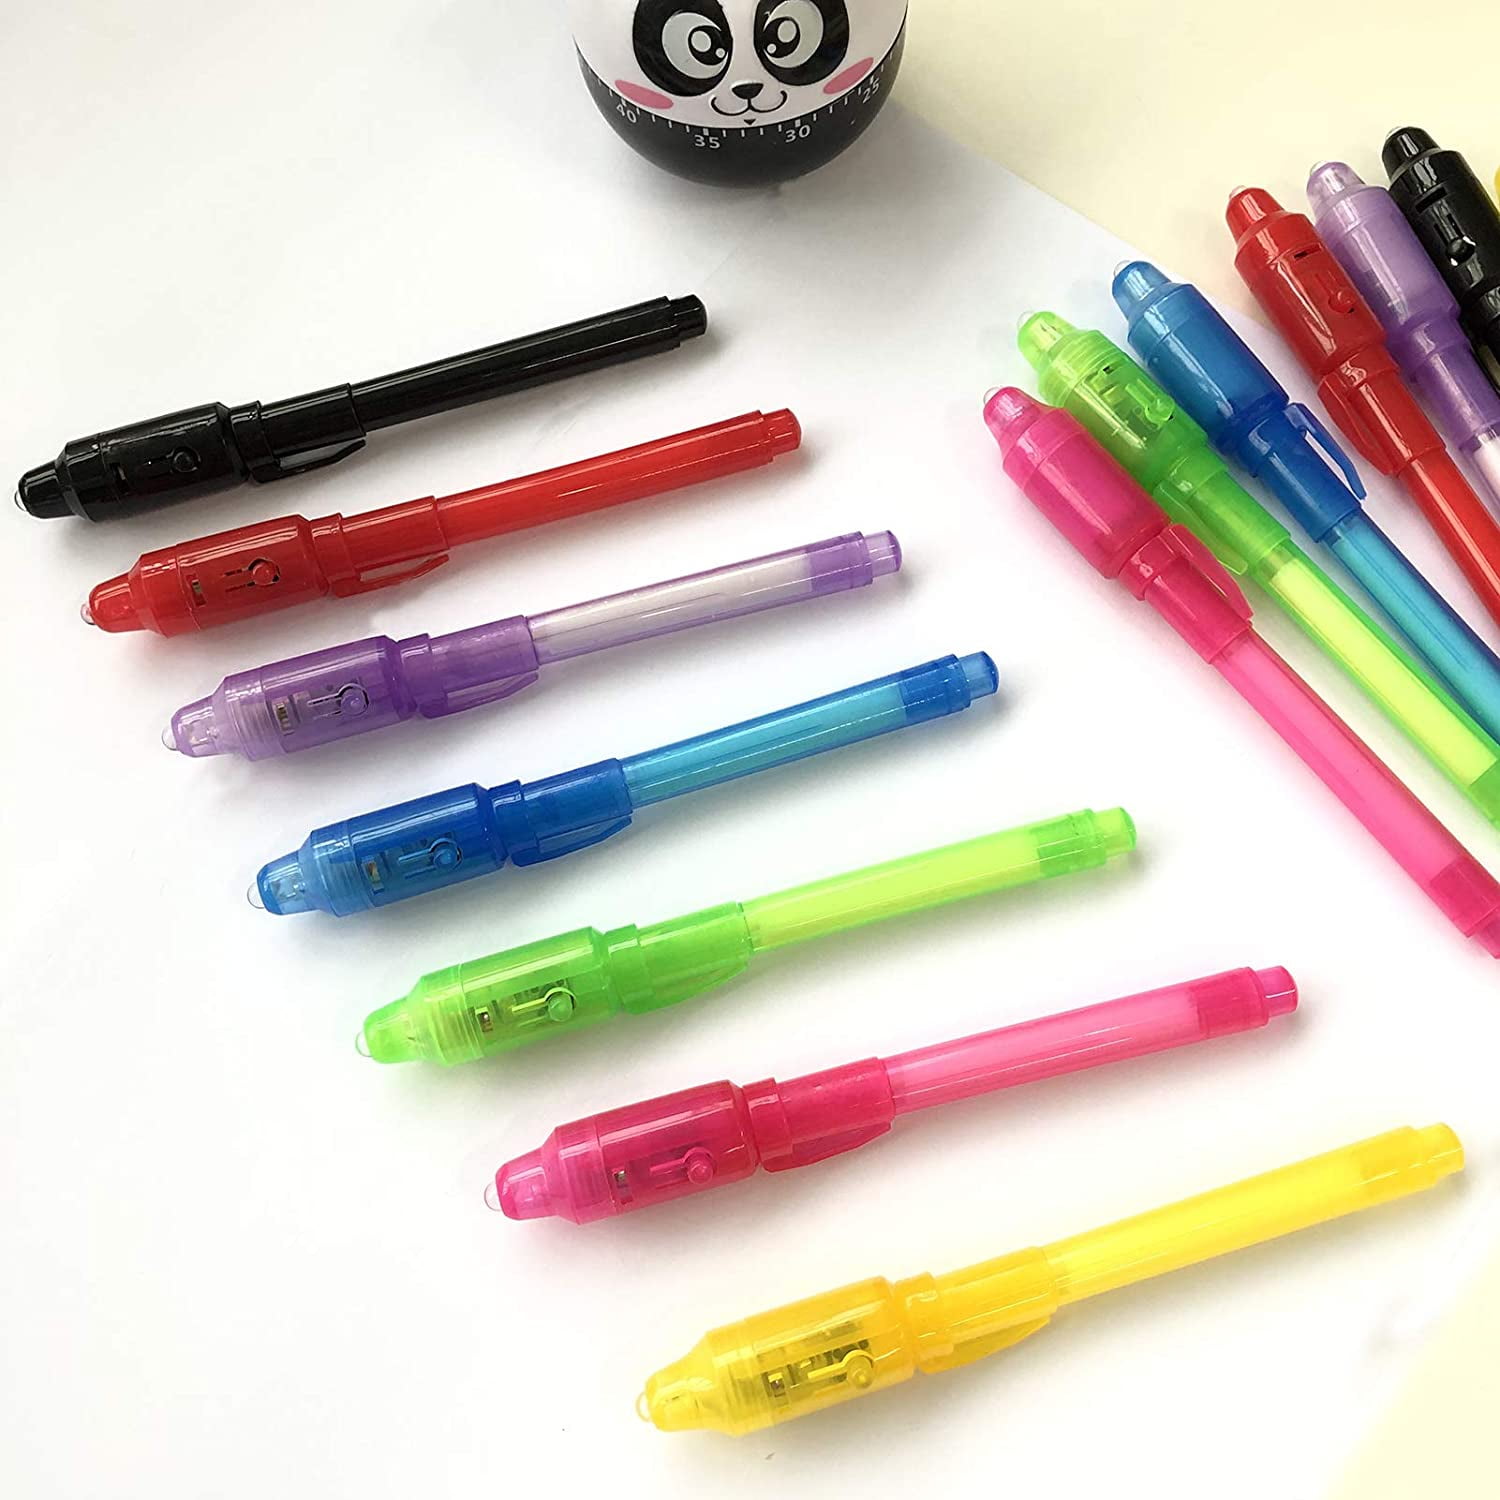 12 Invisible Ink Pens With UV light For Kids, & 12 Paws Mini Notebooks. Dog  Paw Party Favors for Kids 8-12, Spy Toys, Puppy Theme, Invisible Ink Pen  for Diary. 12 Bags